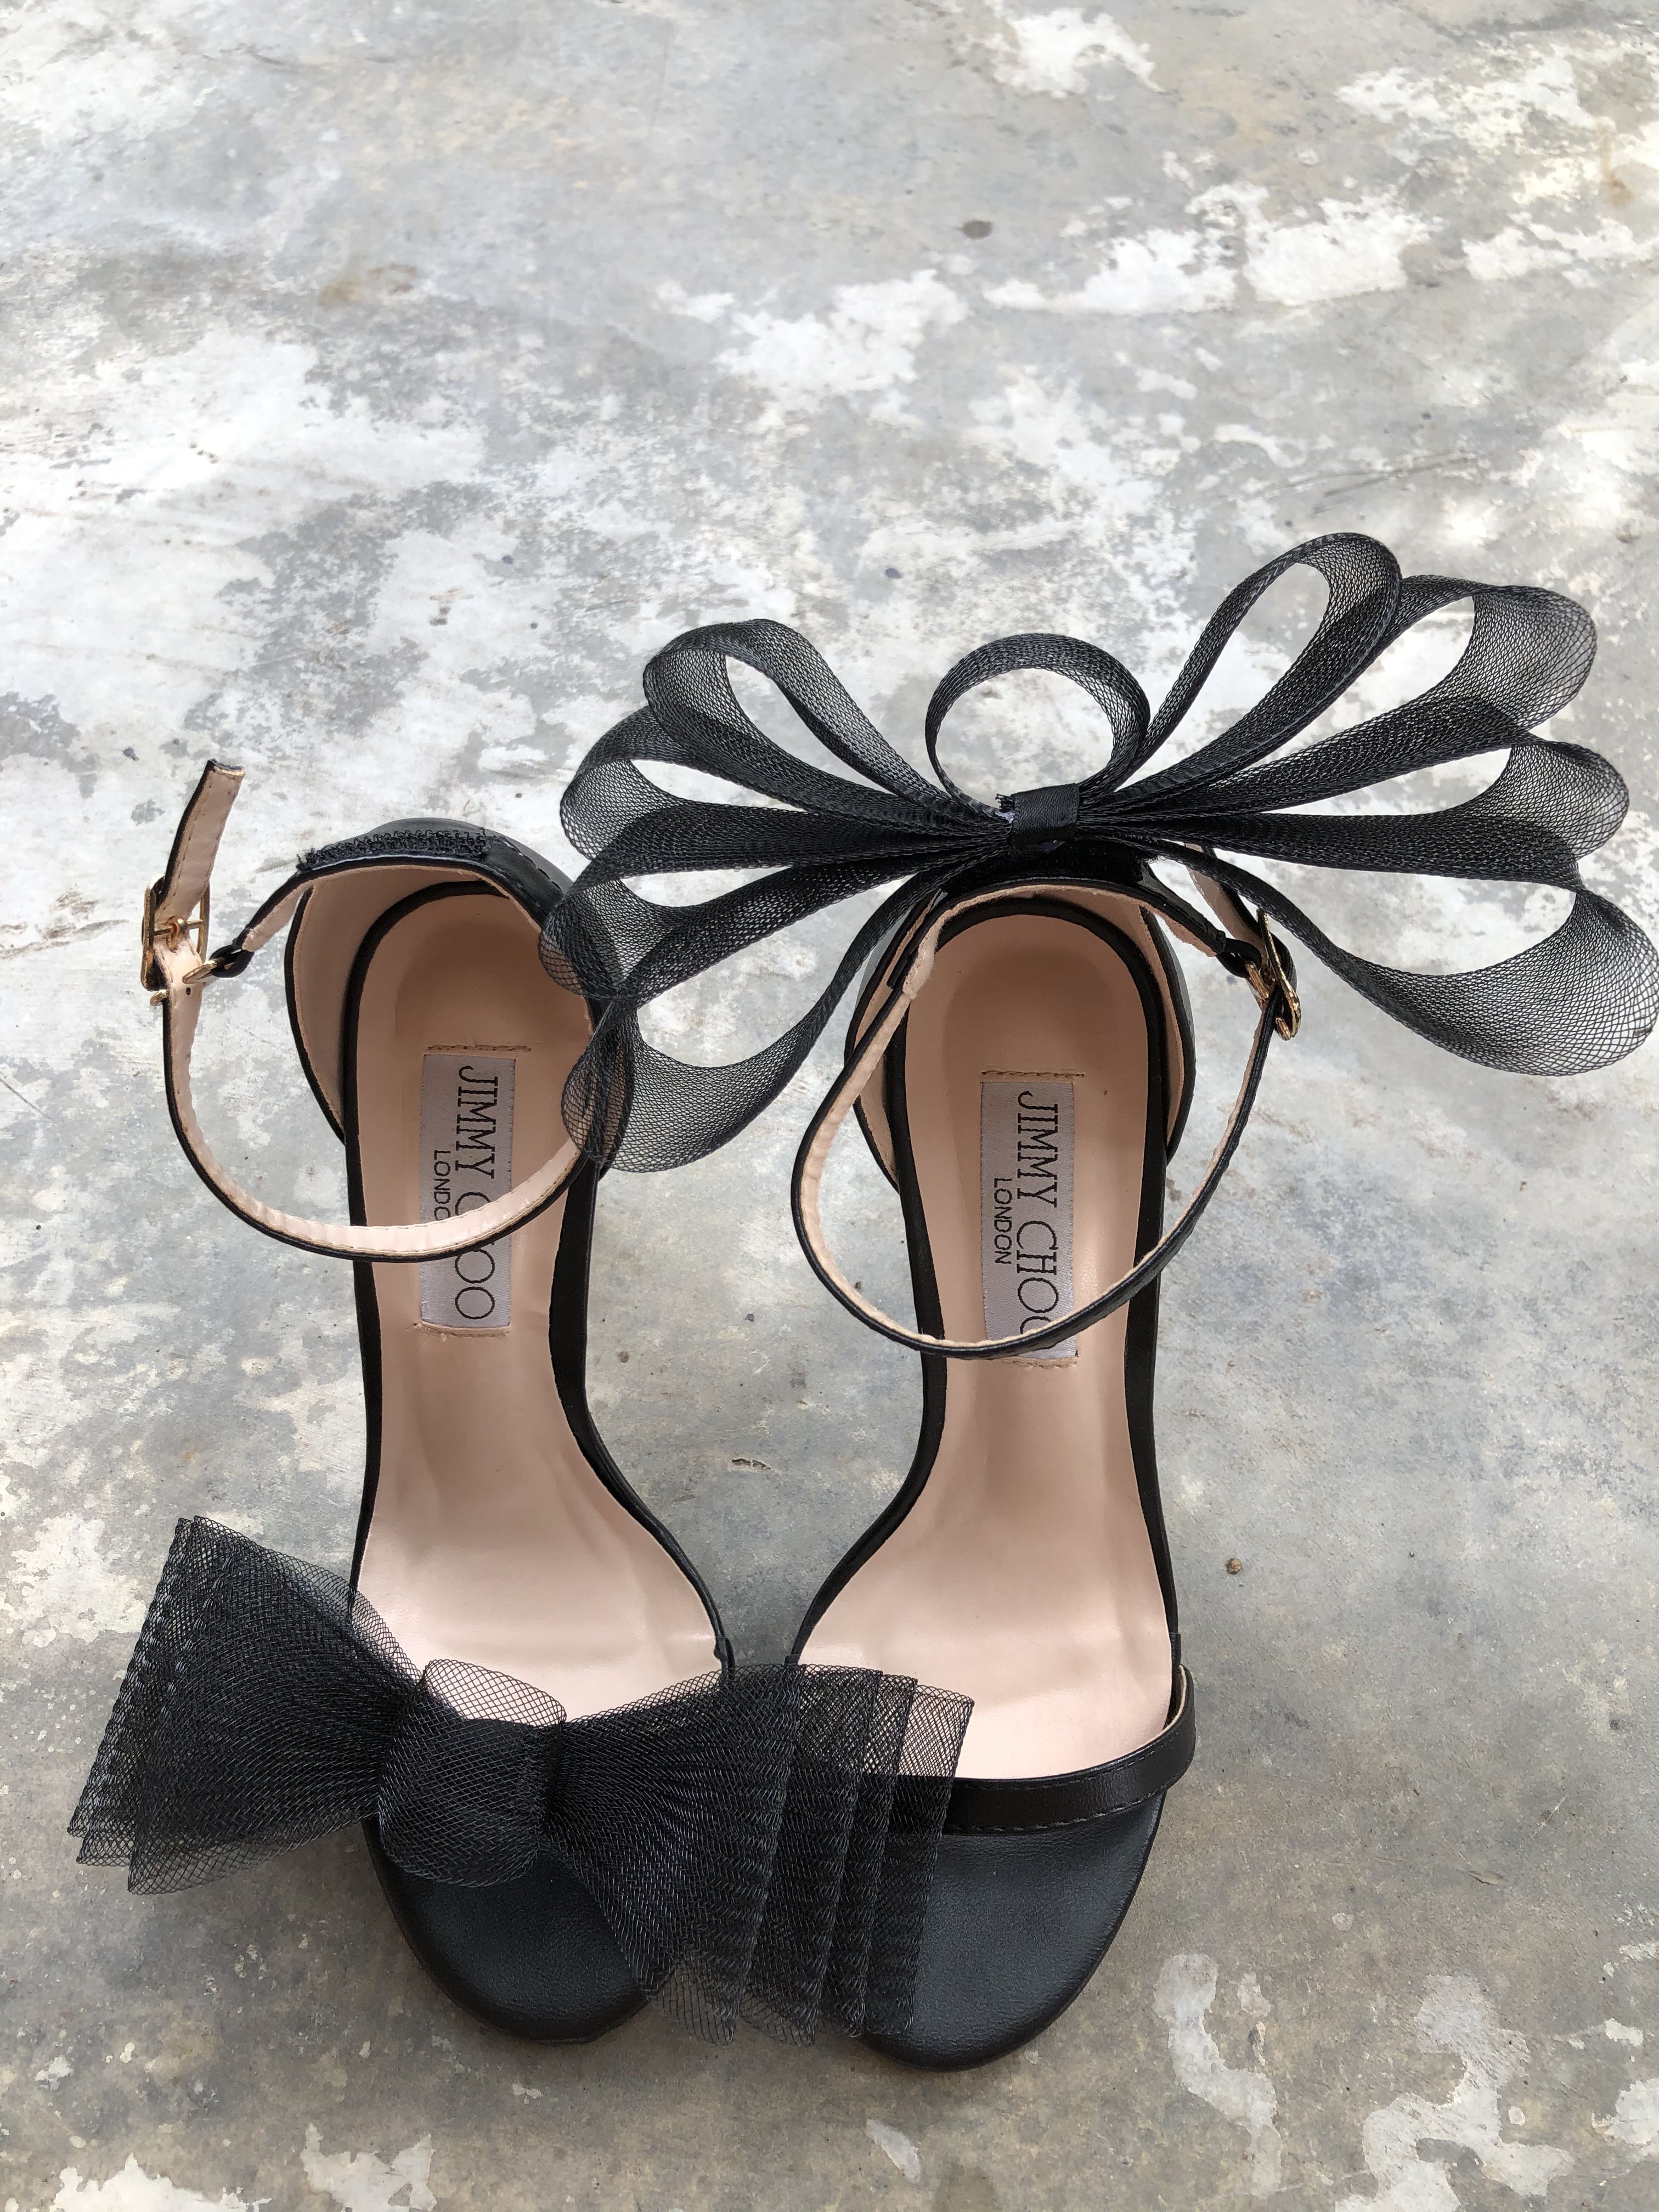 JIMMY CHOO - Dare to stand out with our AVELINE mesh bow heels.  http://bit.ly/BLACK_AVELINE | Facebook